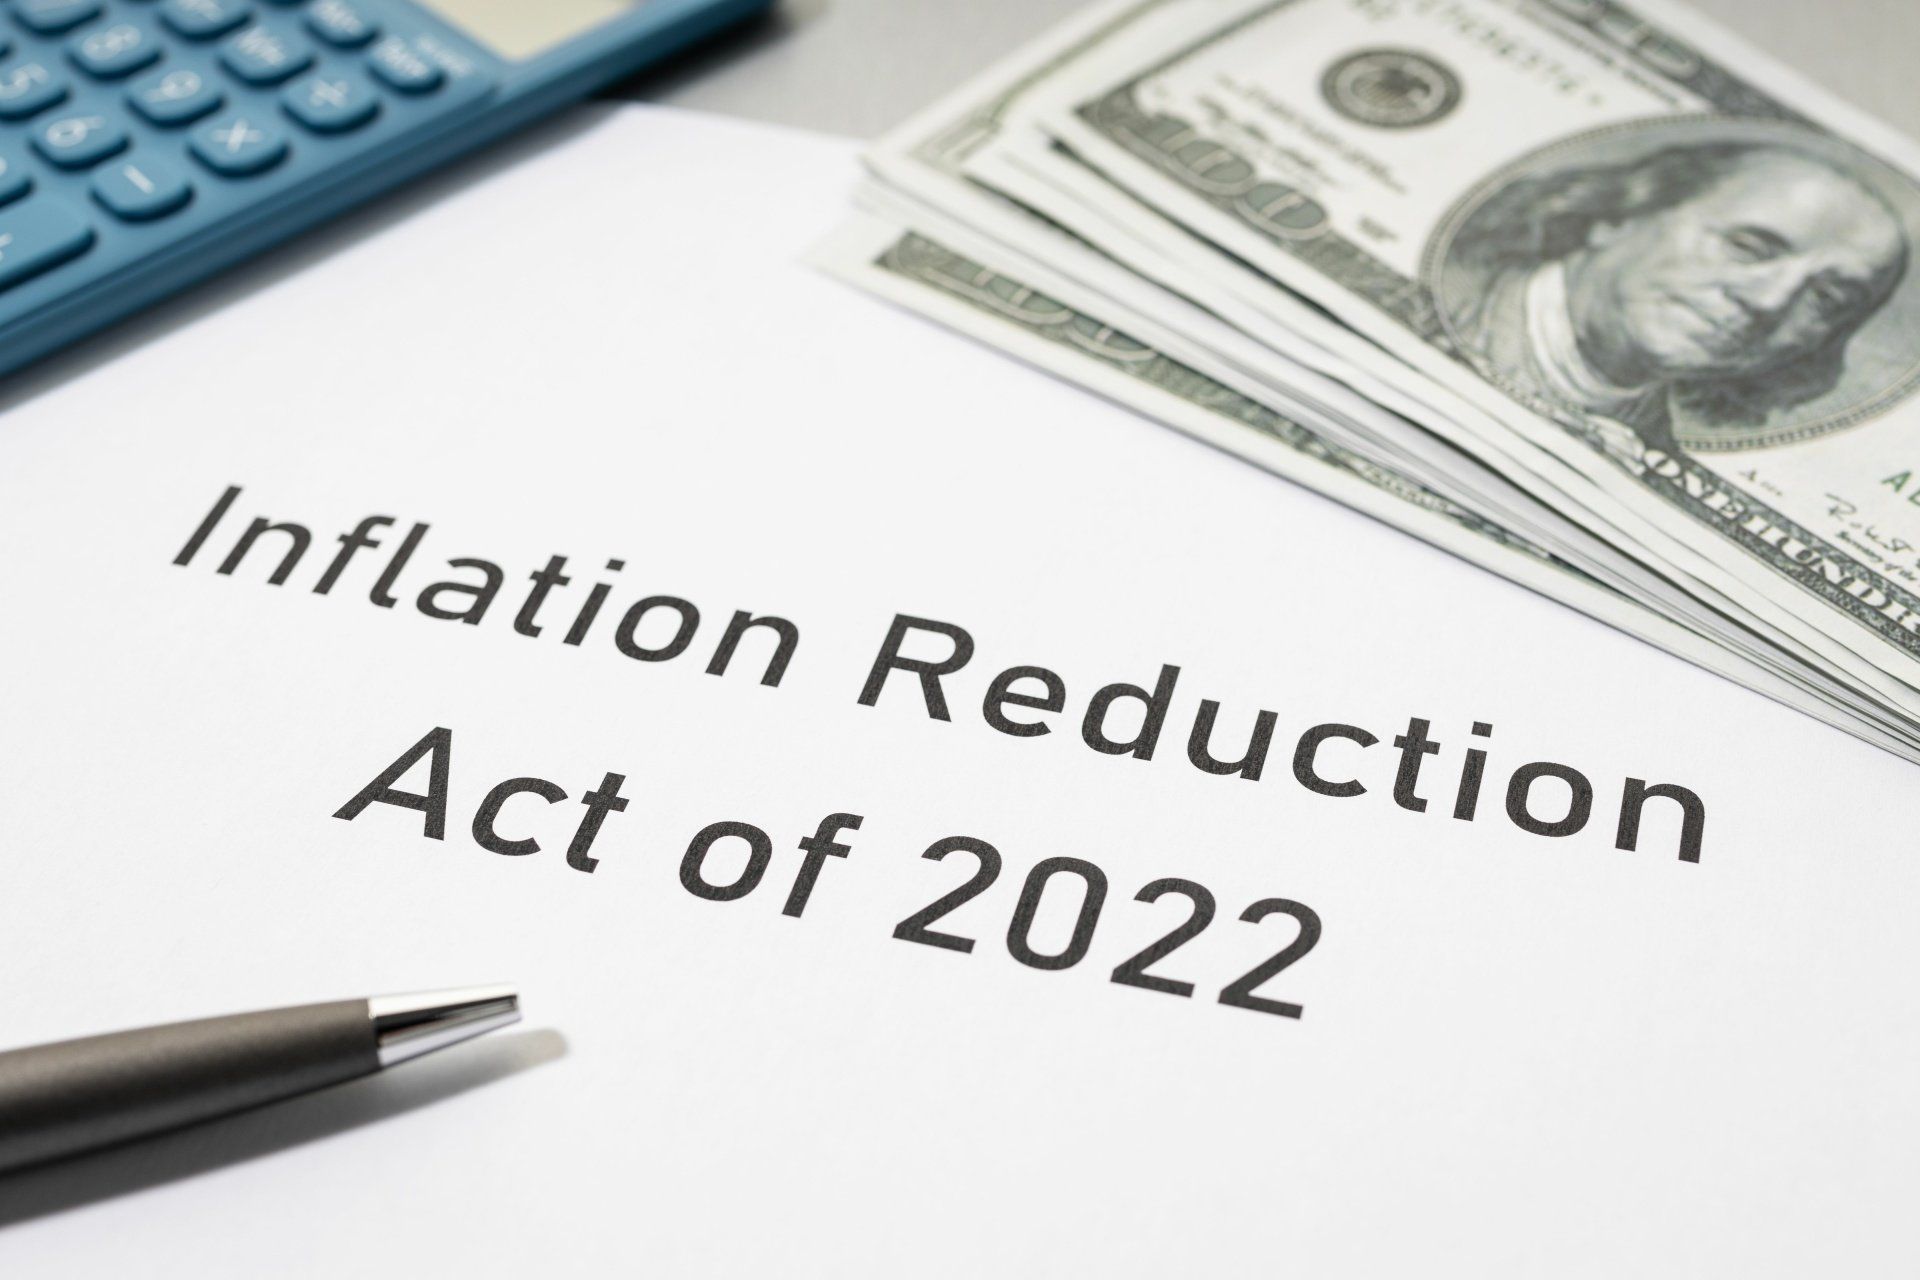 Inflation reduction act 2022